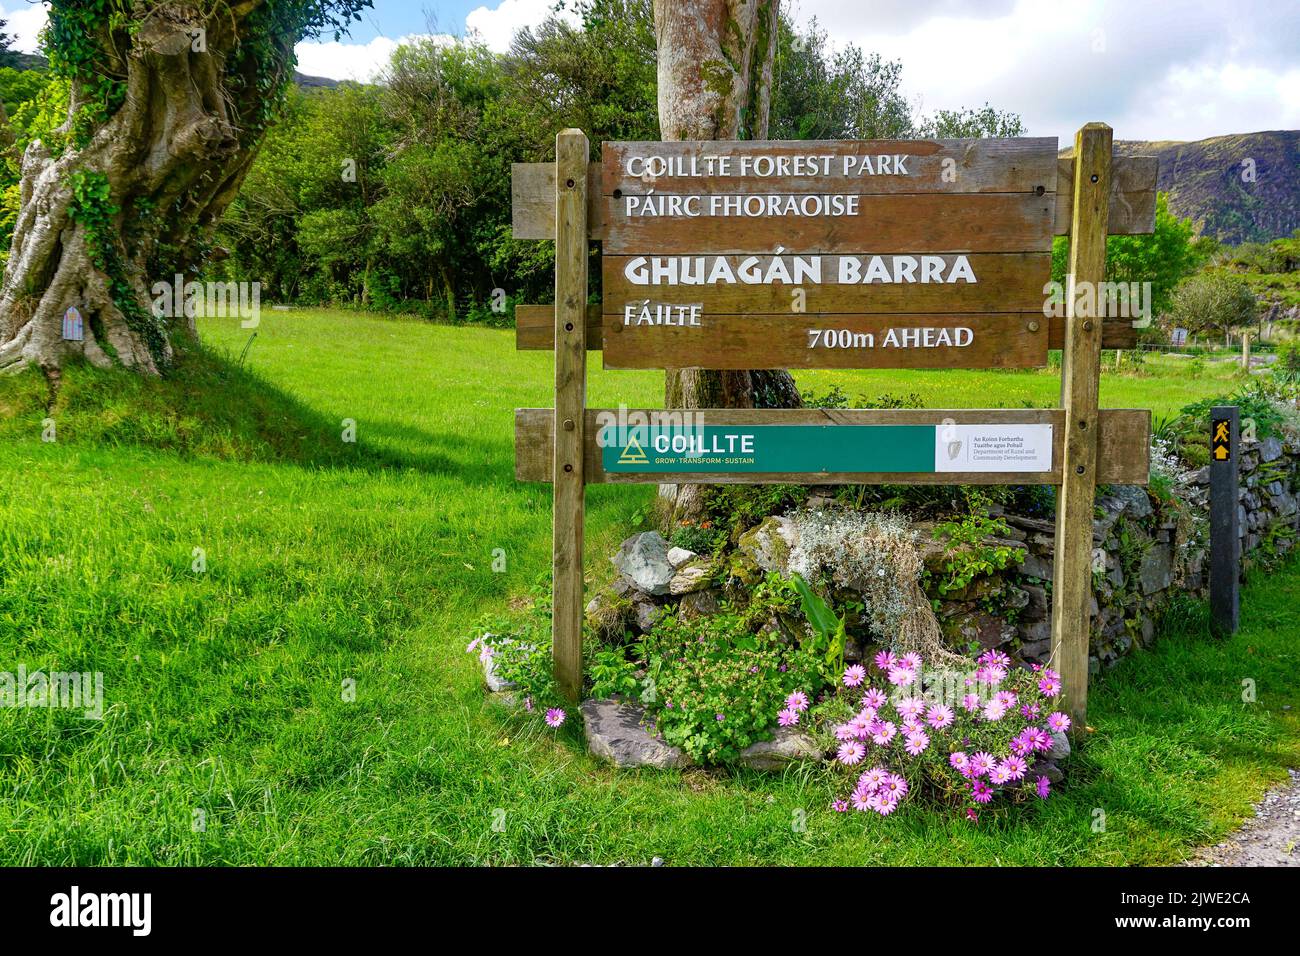 Gougane Barra, Co. Cork, Ireland: A sign in English and Gaelic welcomes visitors to Gougane Barra Forest Park. Stock Photo